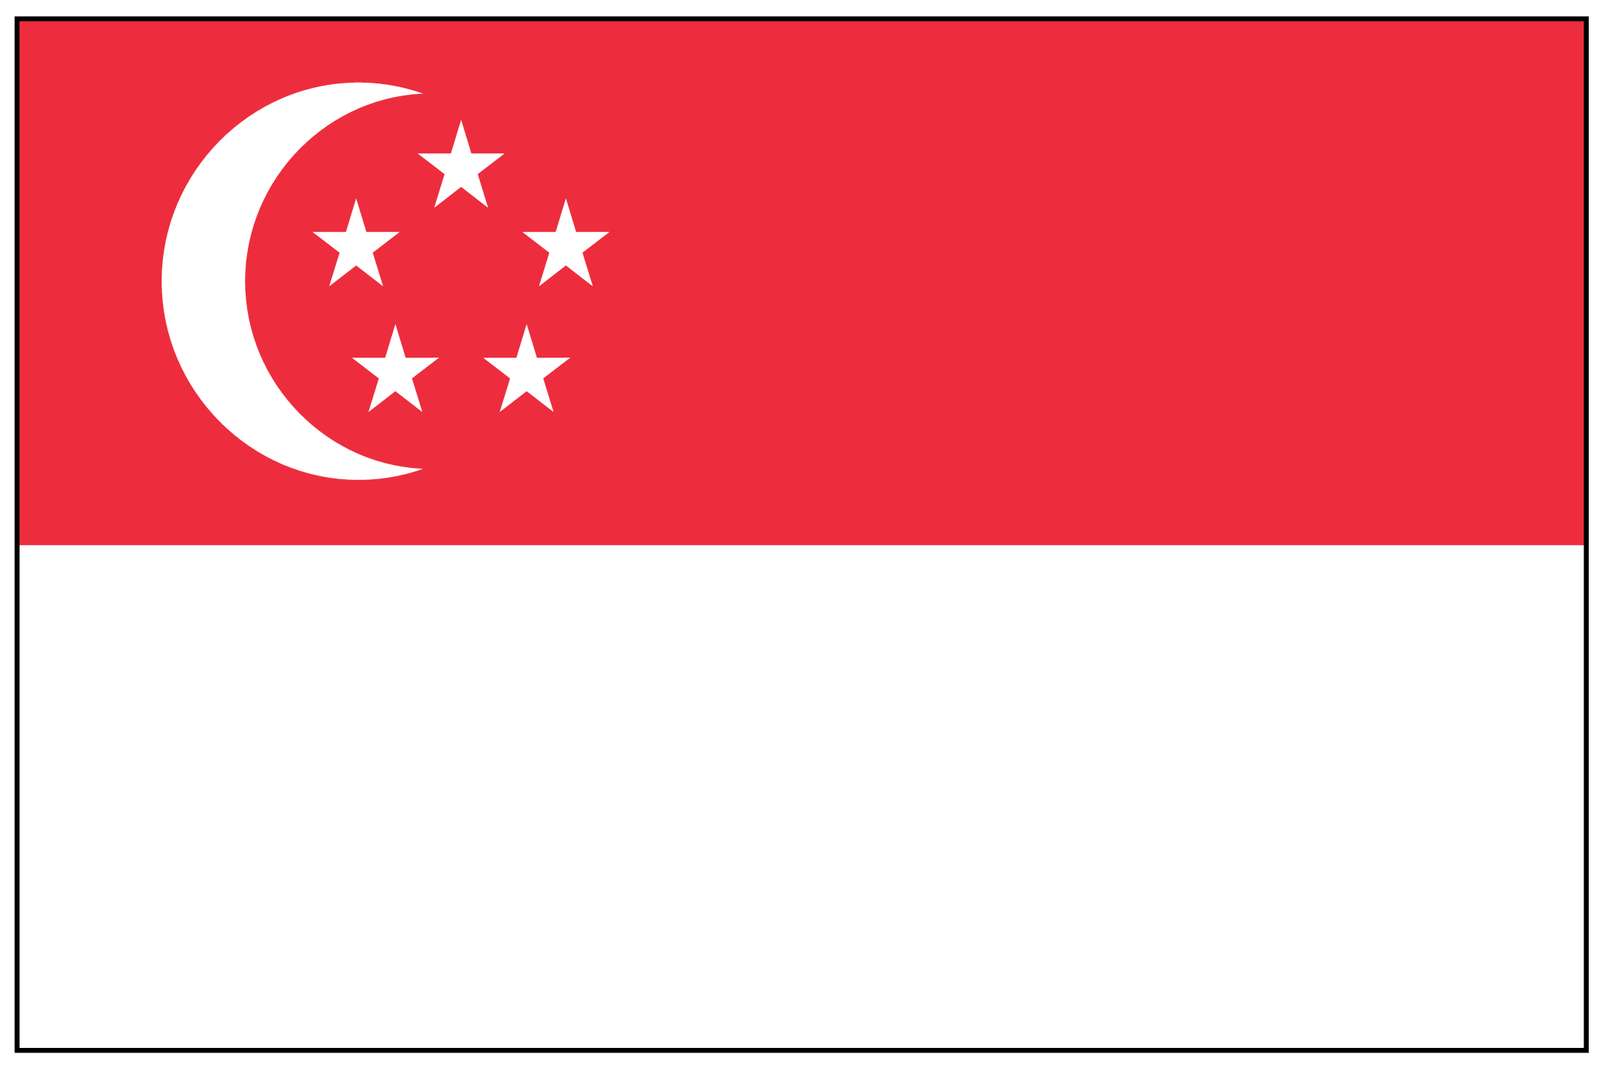 Singapore Flag puzzle online from photo